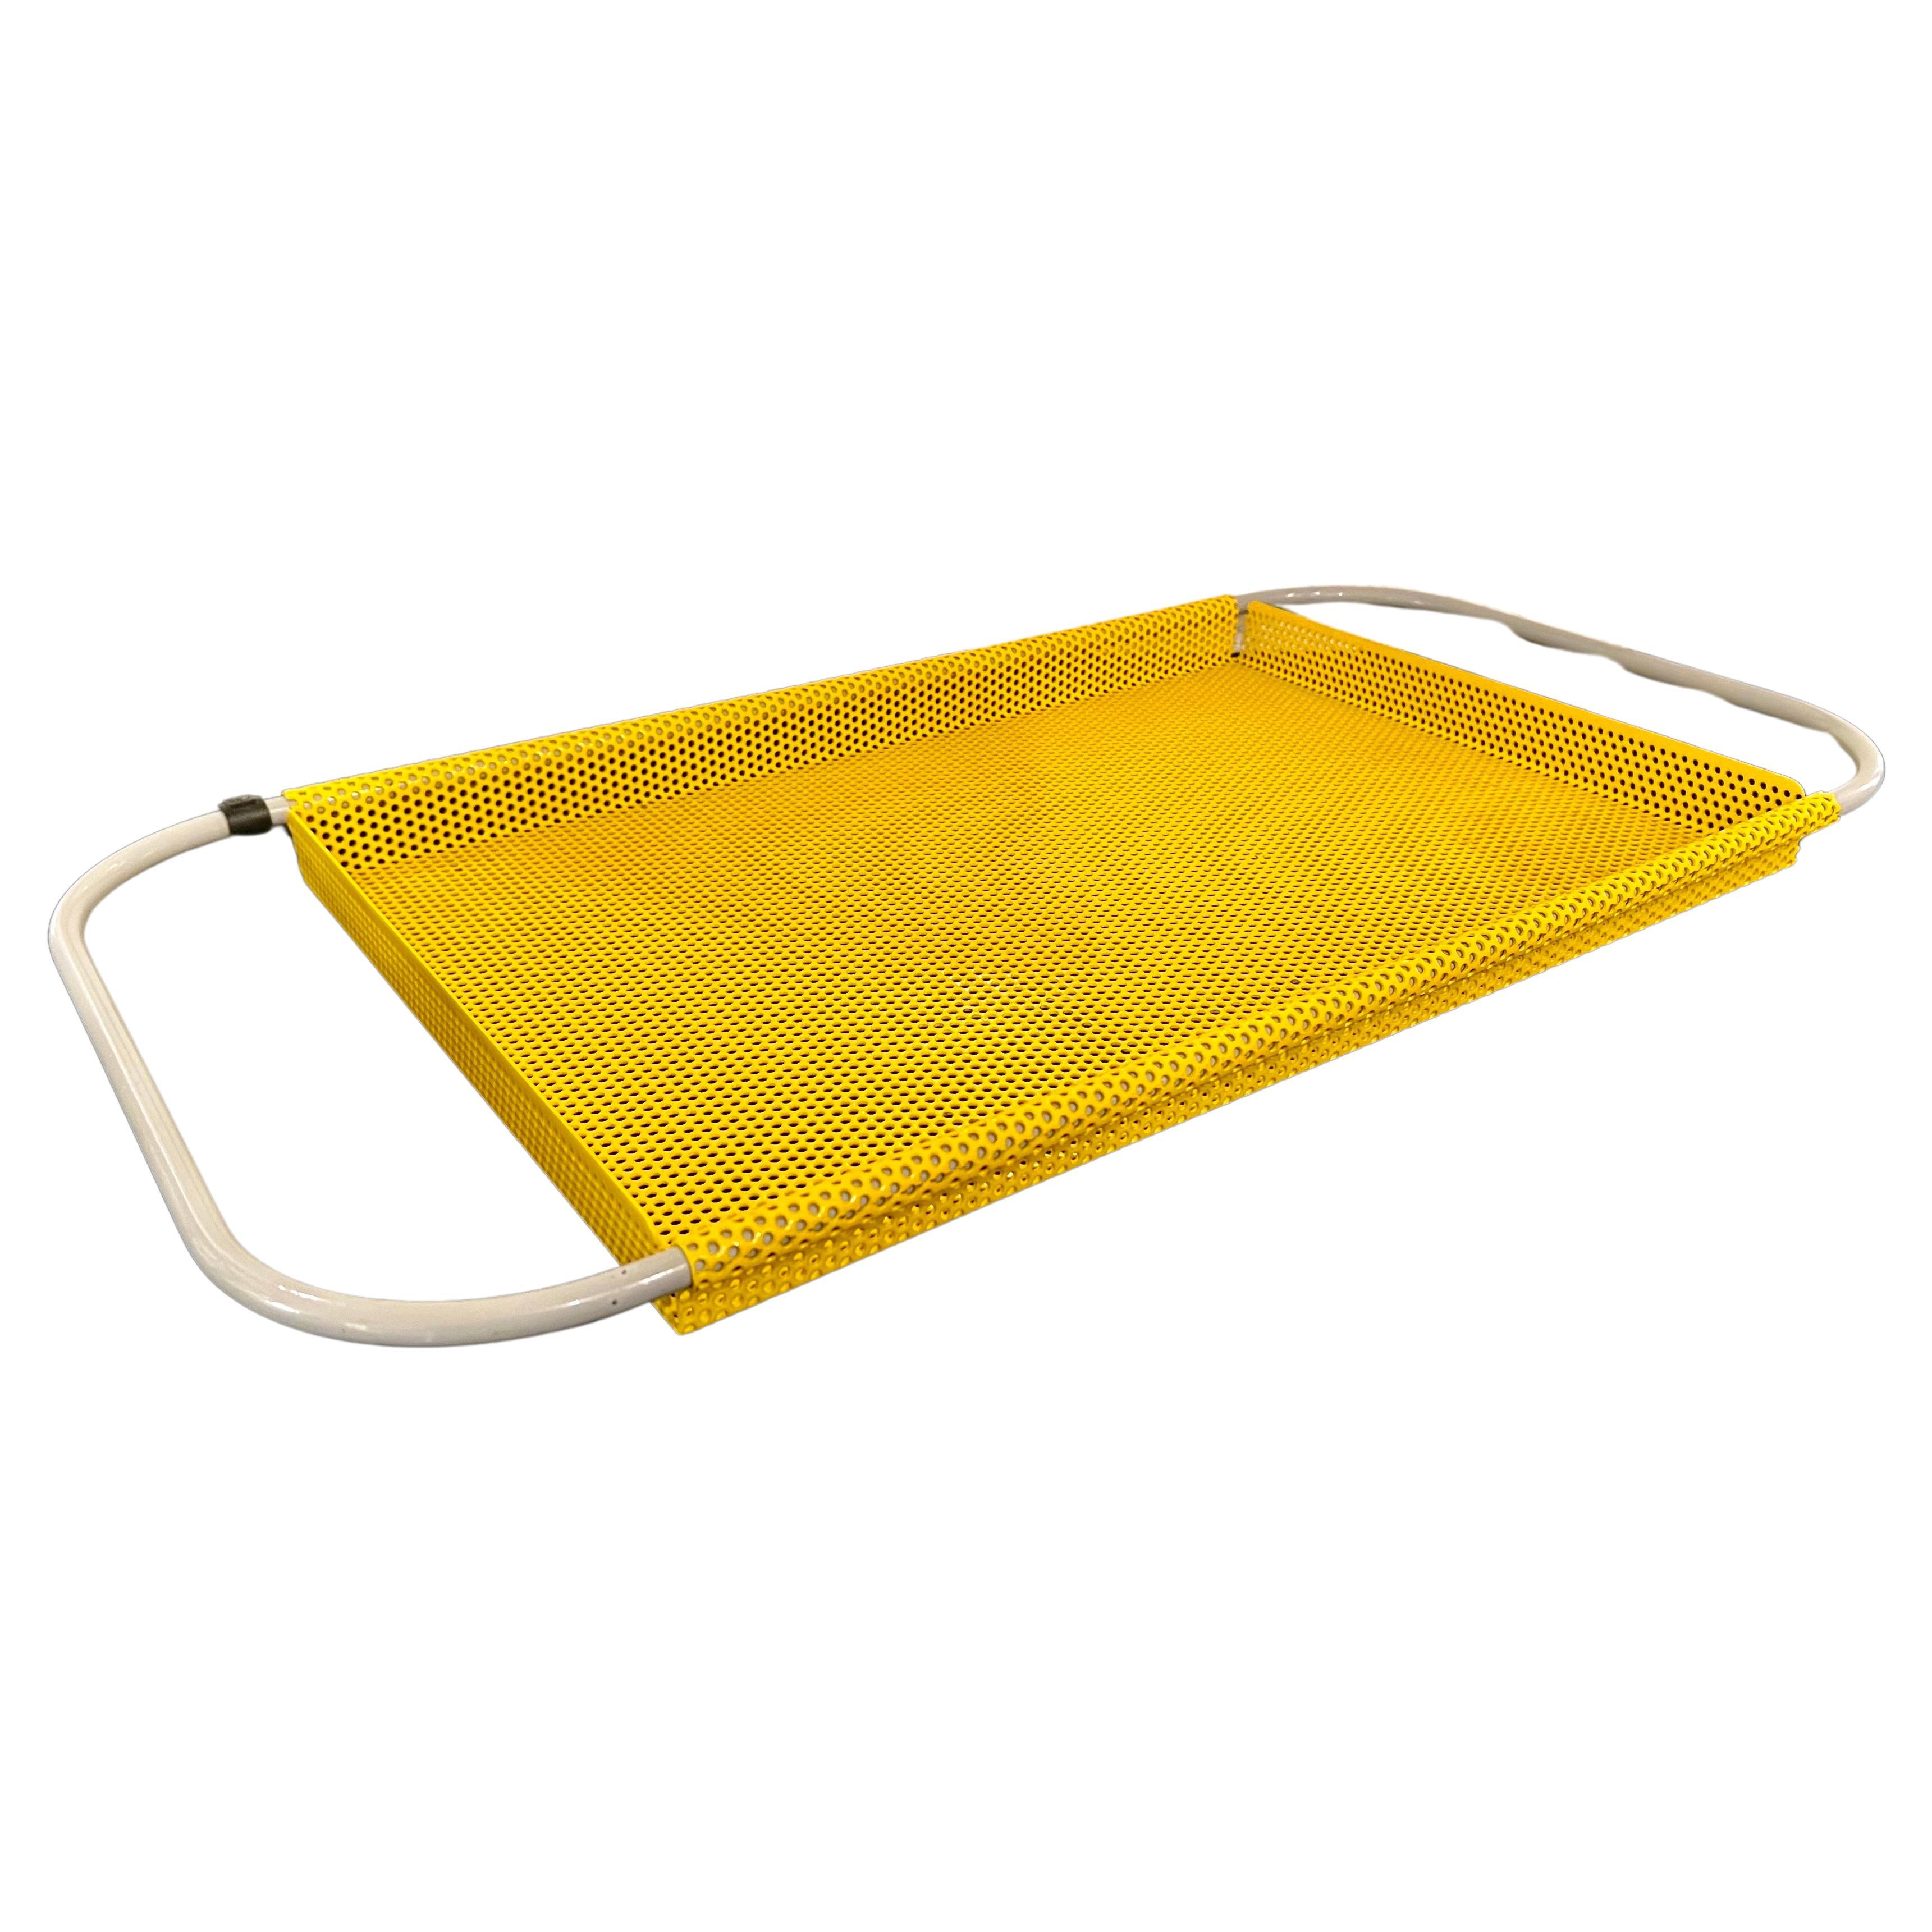 Postmodern Italian 1980's Perforated Metal Tray For Sale